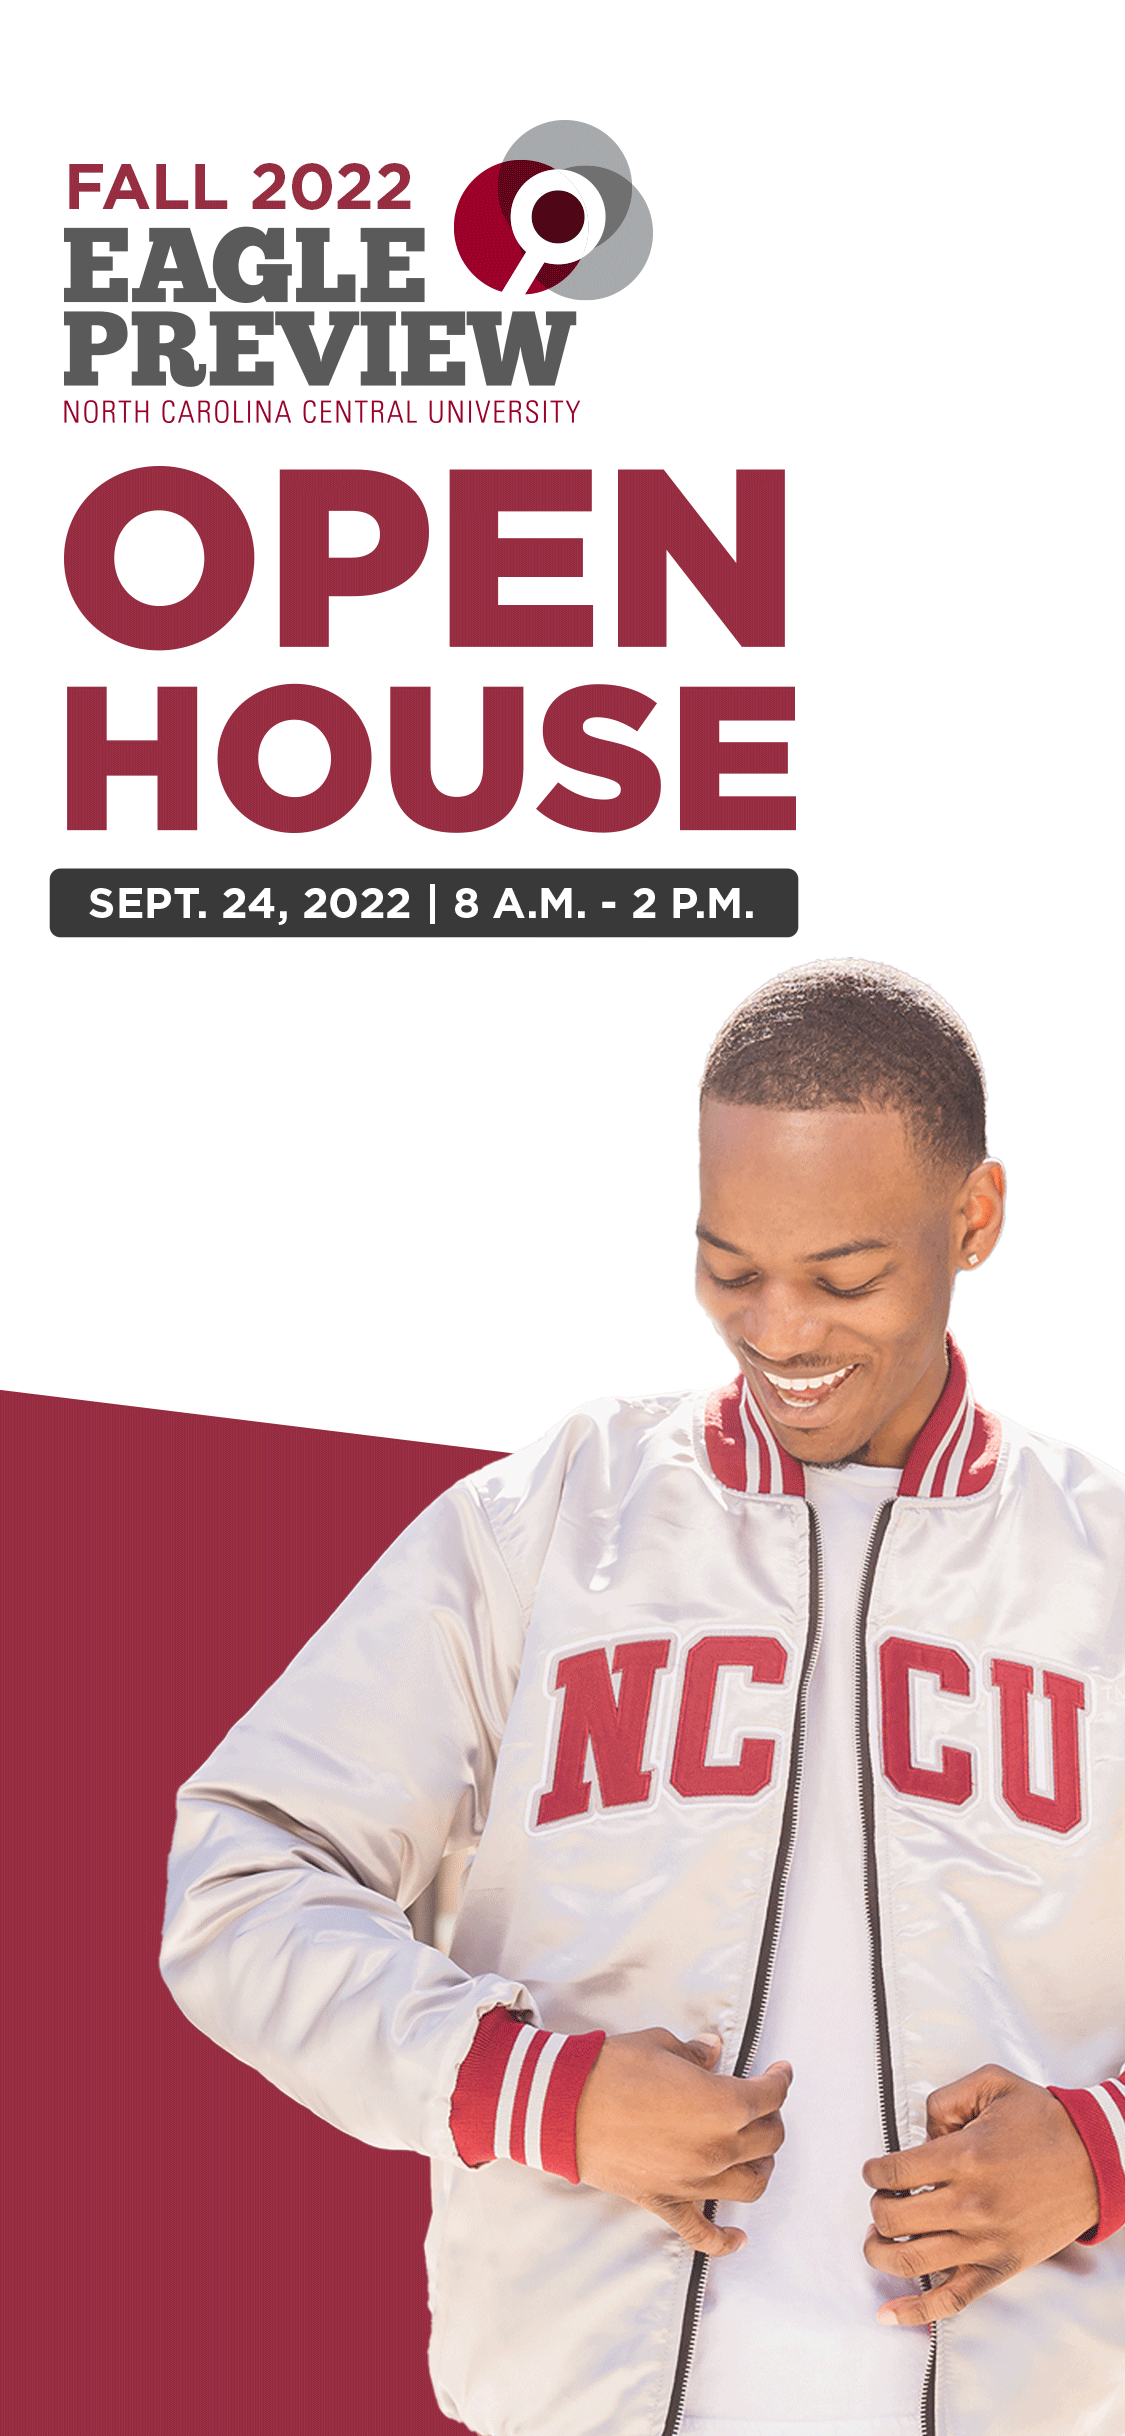 Fall 2022 Eagle Preview Open House: September 24, 2022, 8 a.m. until 2 p.m.